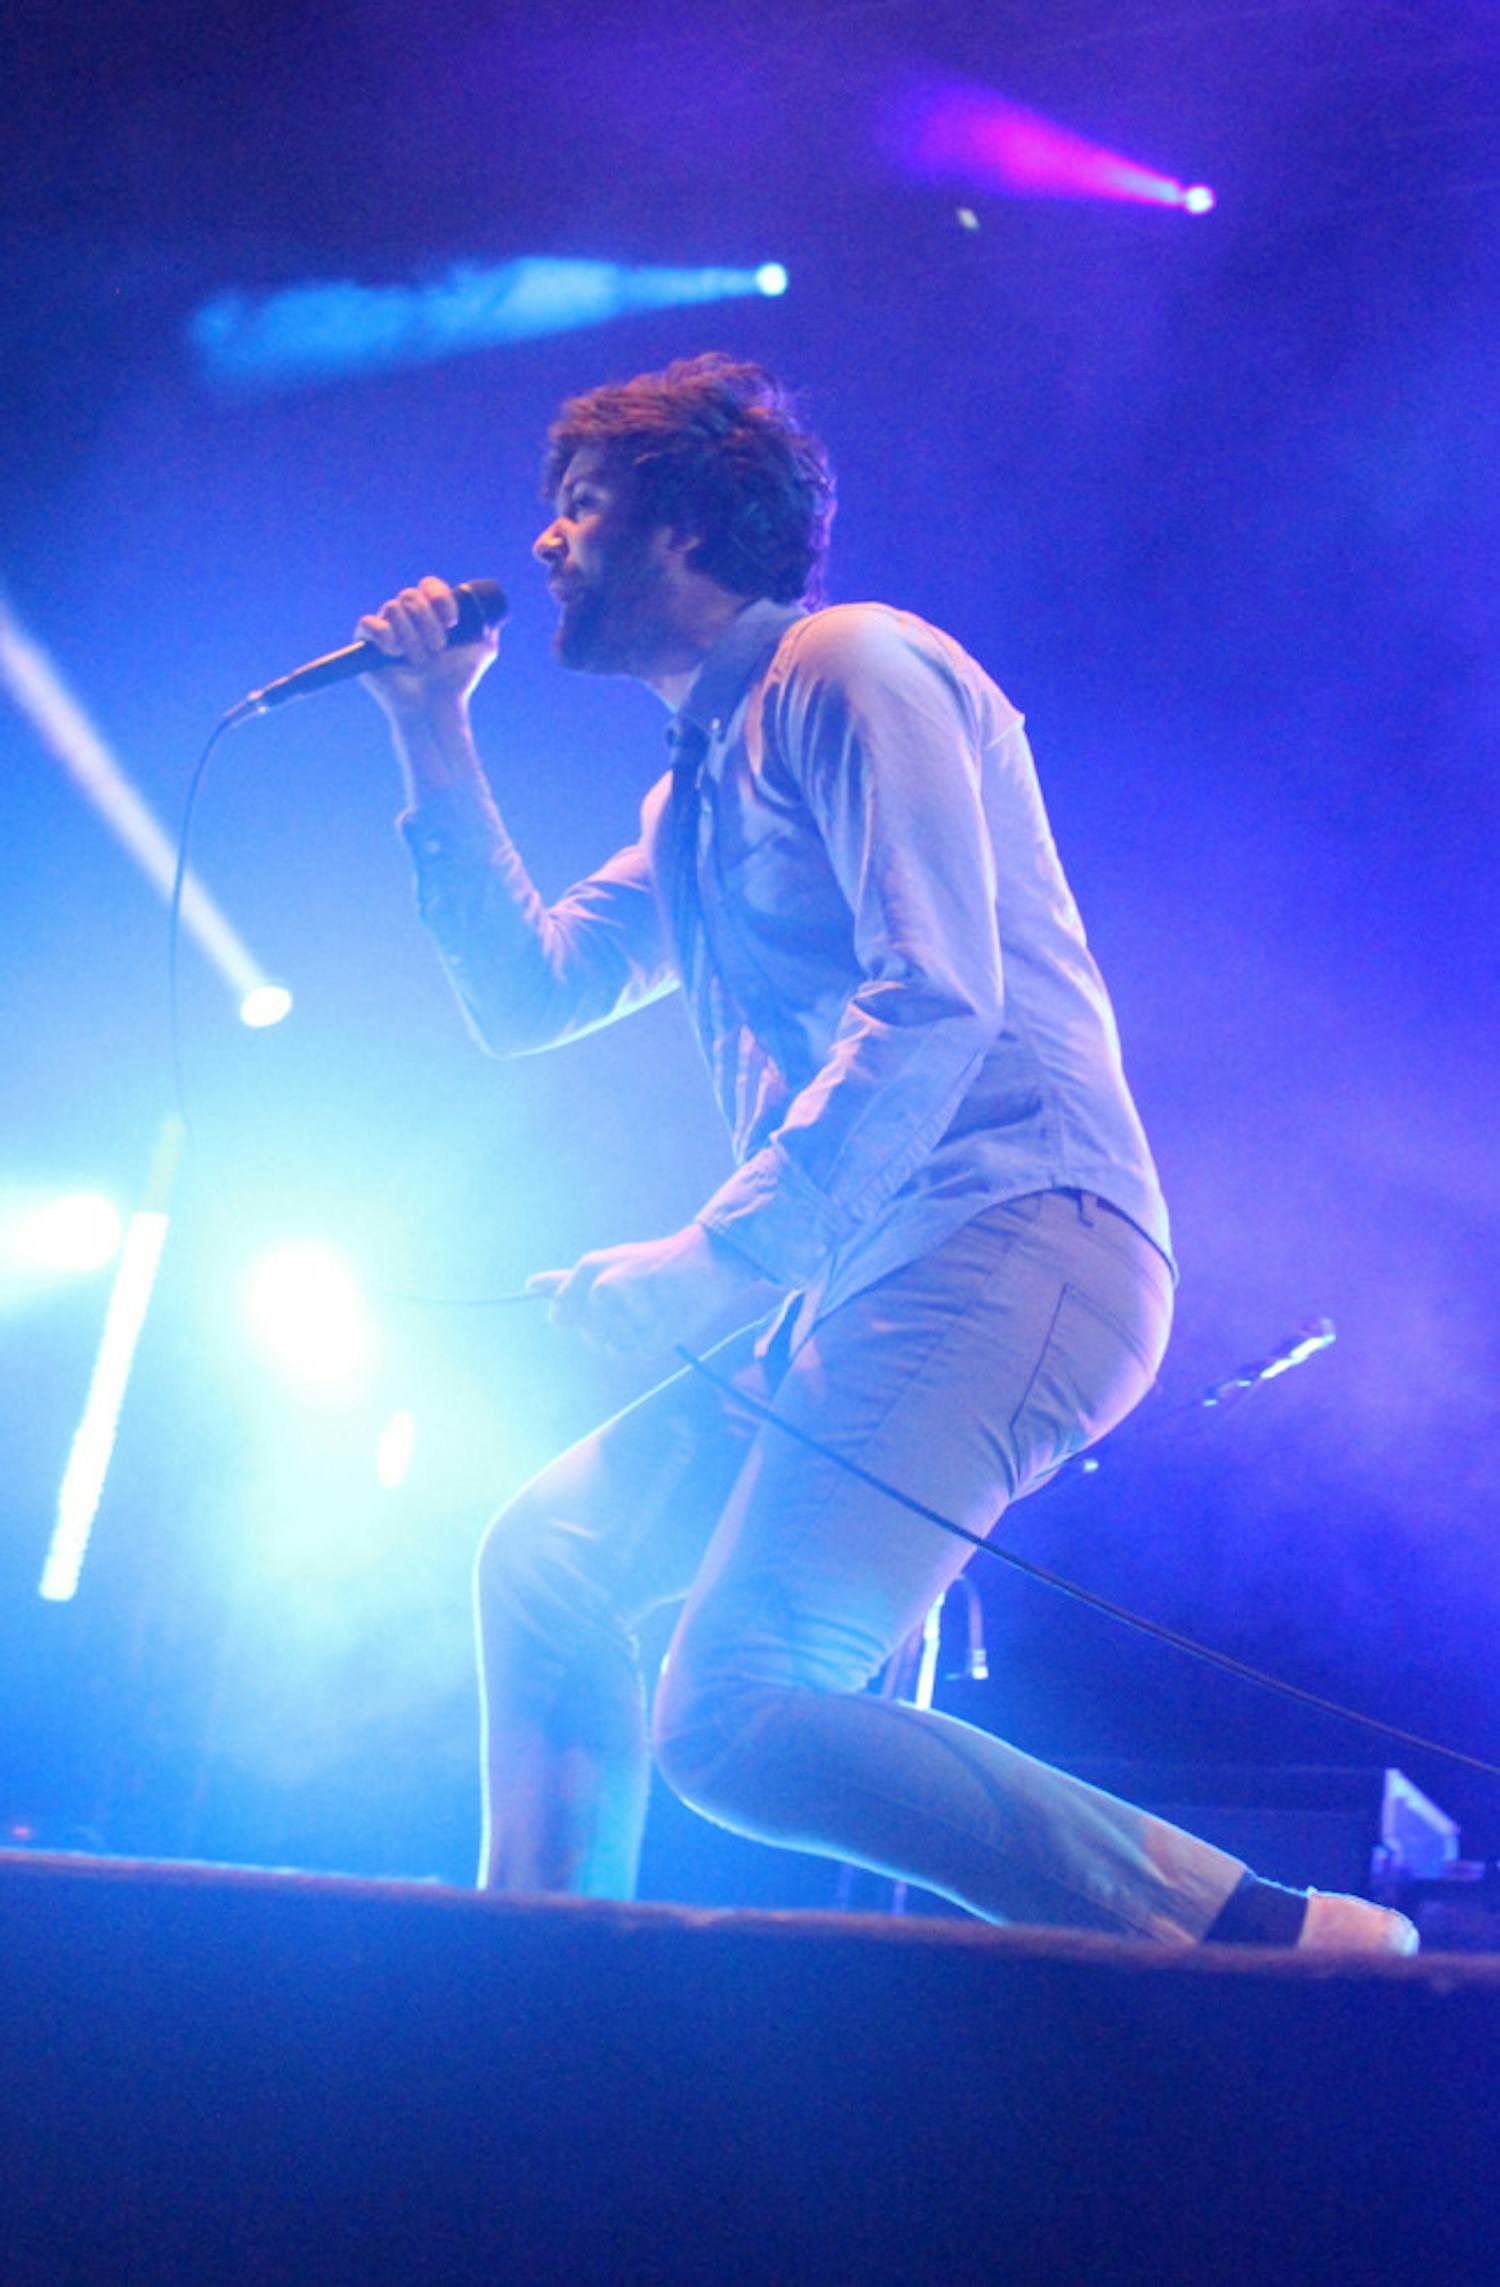 Michael Angelakos, the lead singer for Passion Pit, performs as the last act of the night at Coastline Music Festival.